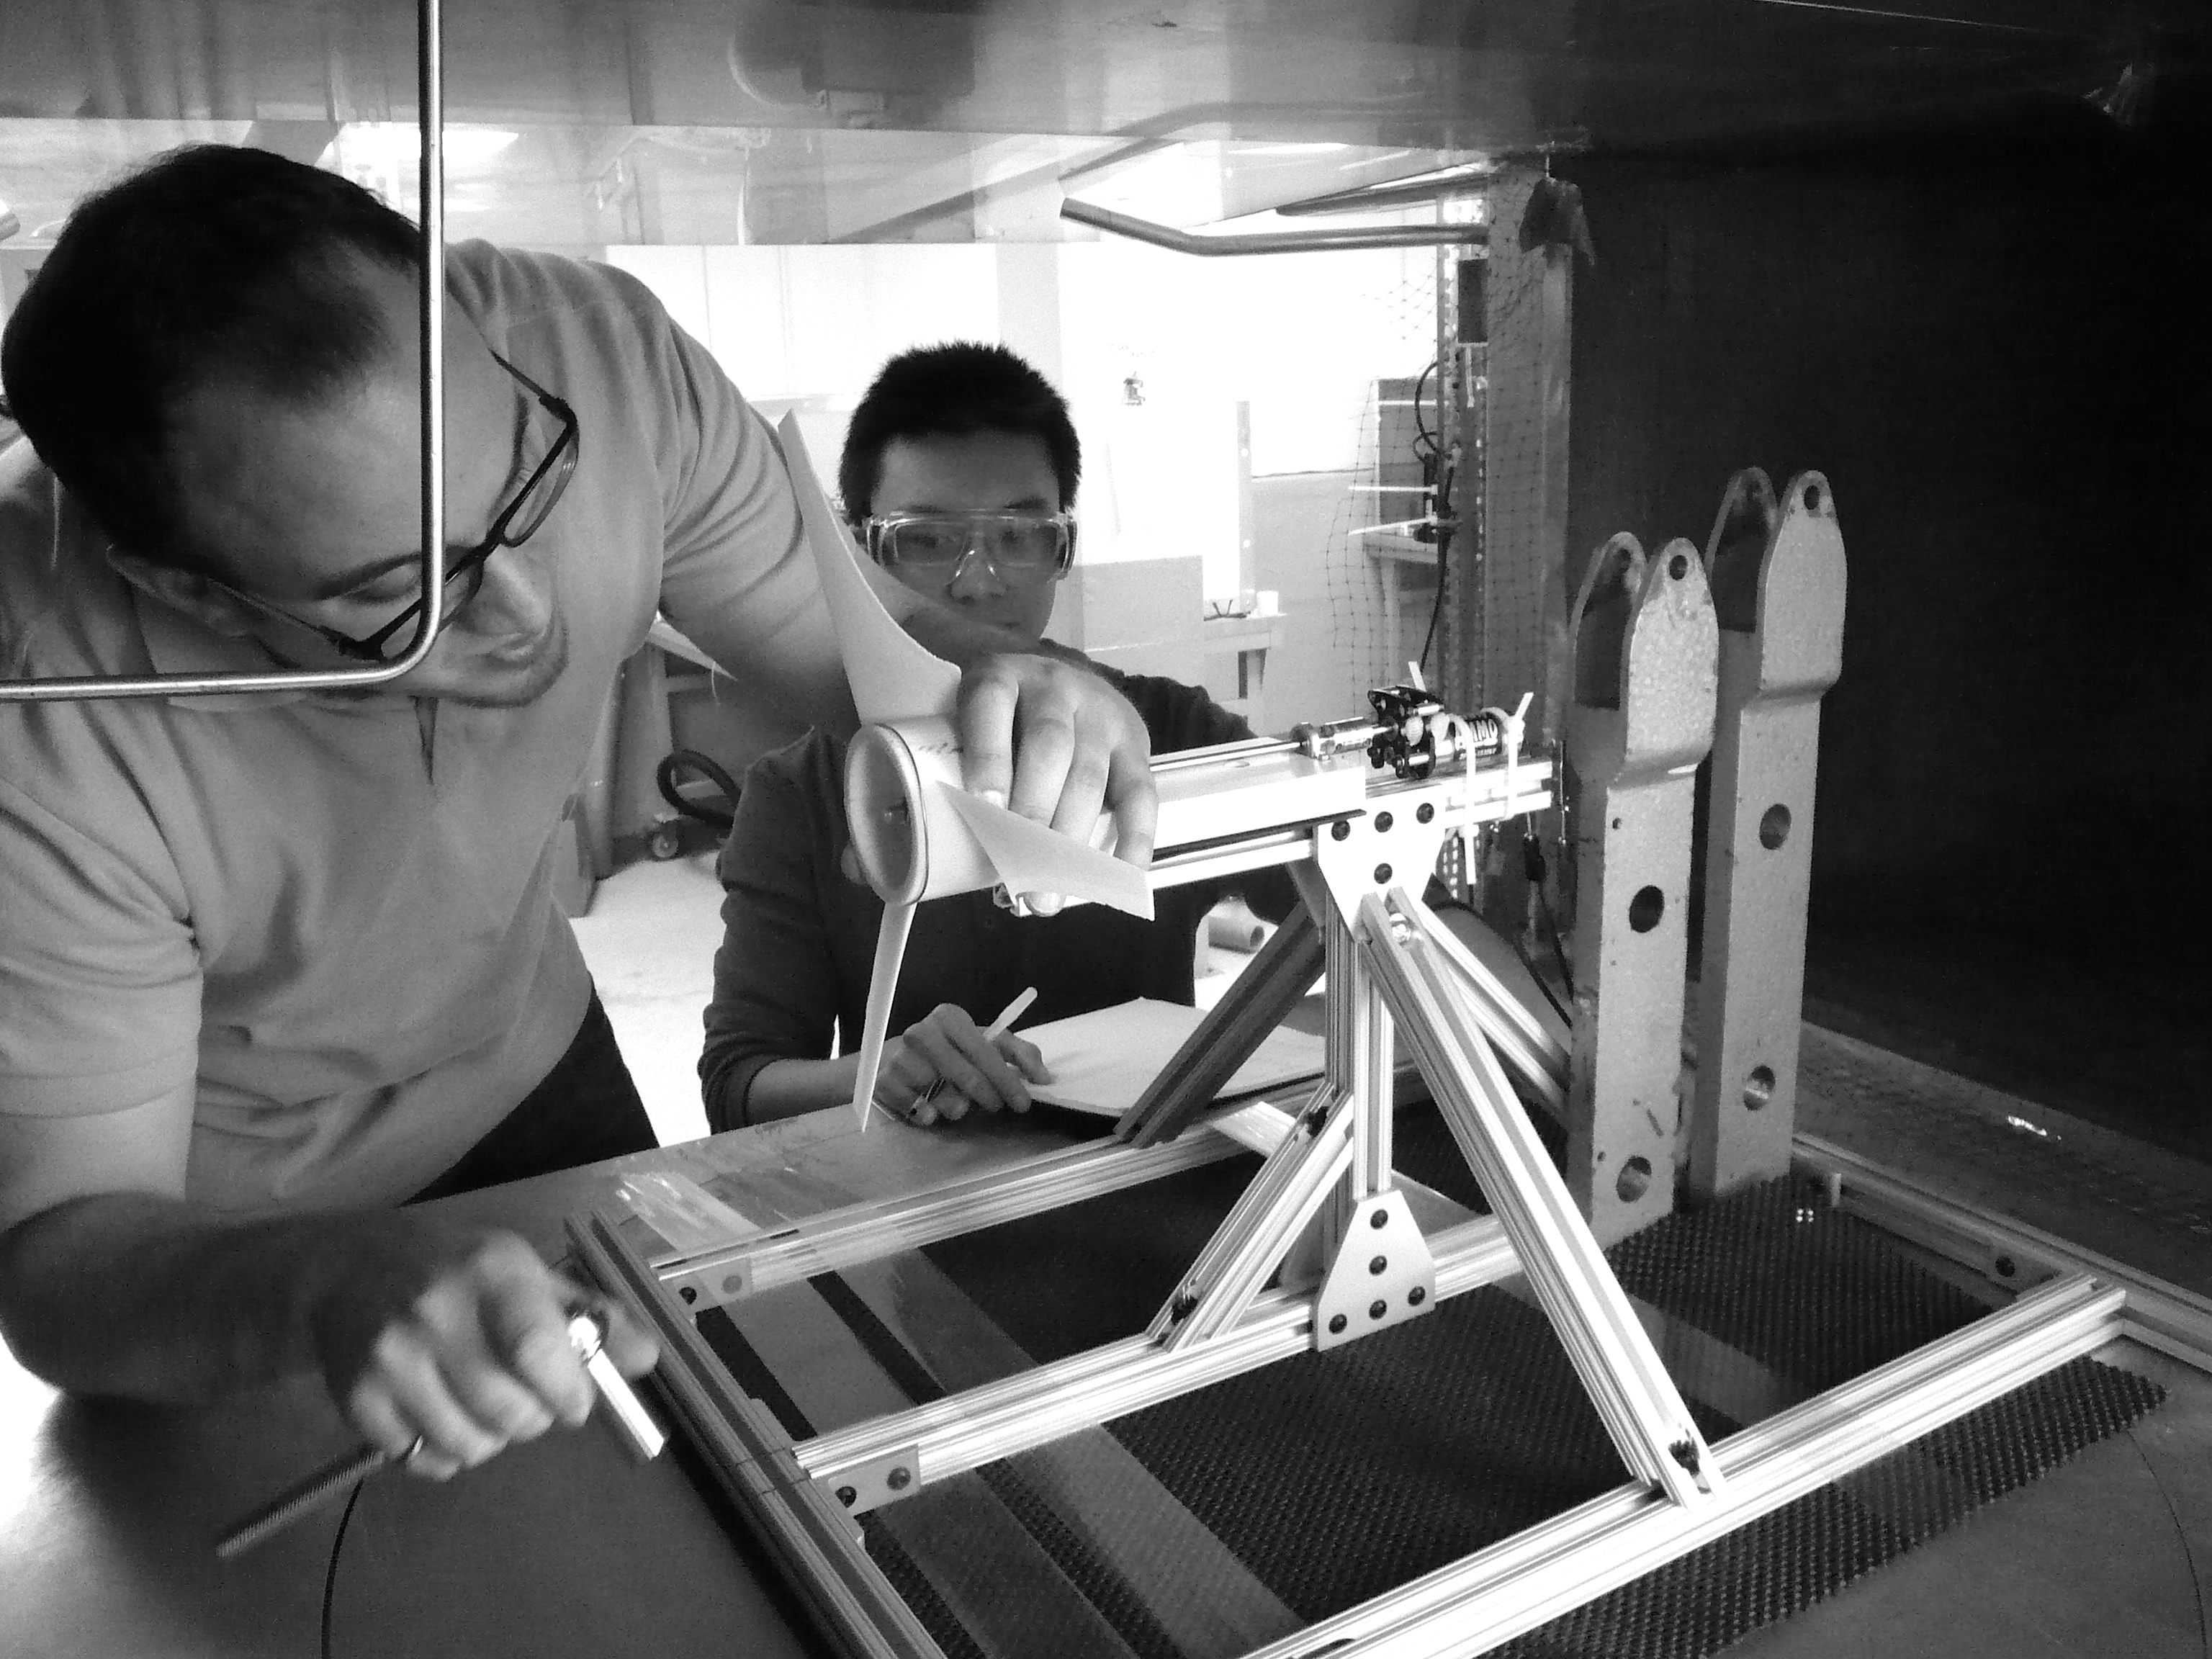 M. Shaefer and J. Chung Installing Test Turbine In the UML Windtunnel